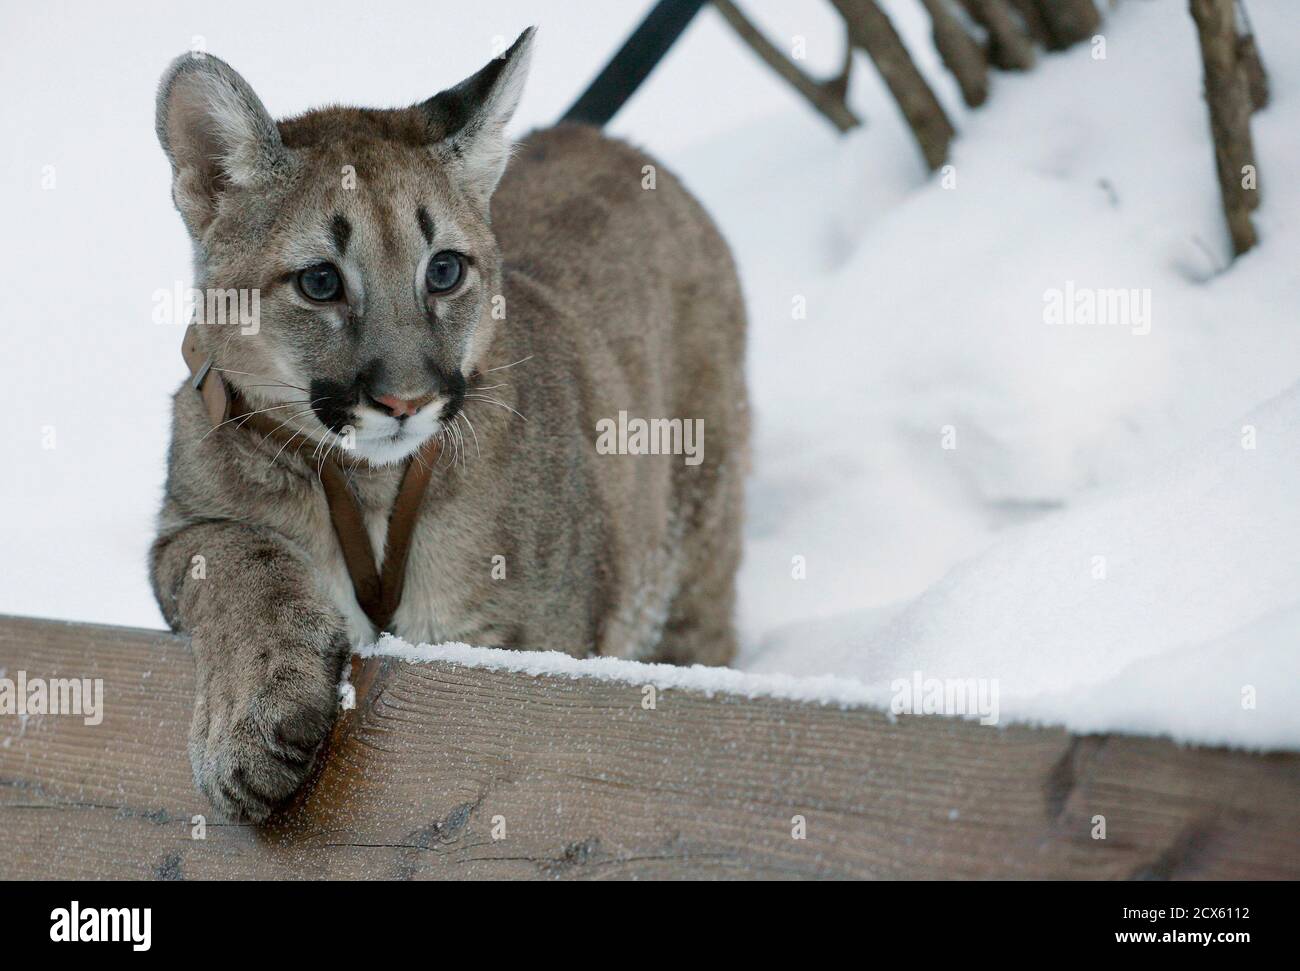 A five-month-old North American puma cub named Arnaldo walks in the snow  after quarantine at the Royev Ruchey Zoo, in the suburb of Russia's Siberian  city of Krasnoyarsk January 13, 2012. Arnaldo